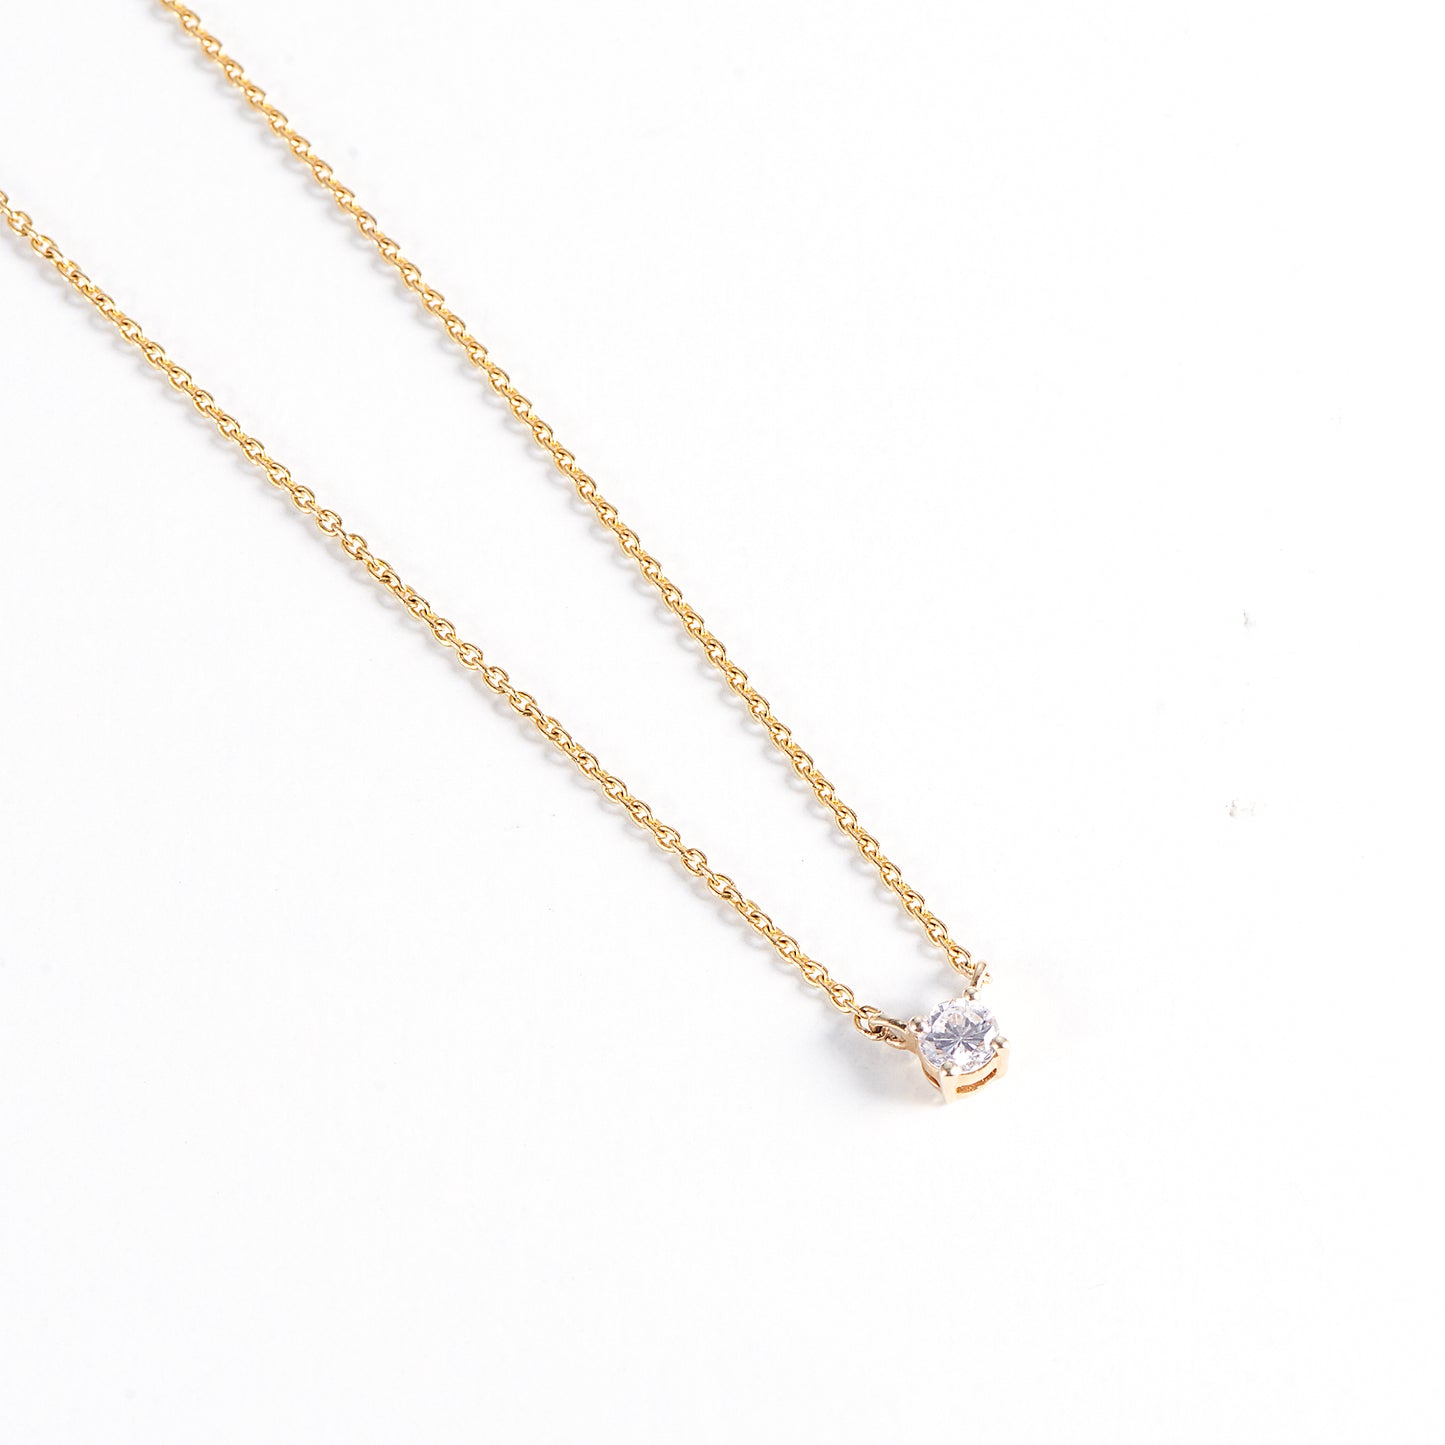 SOLITAIRE NECKLACE WITH 0.20 crts DIAMONDS